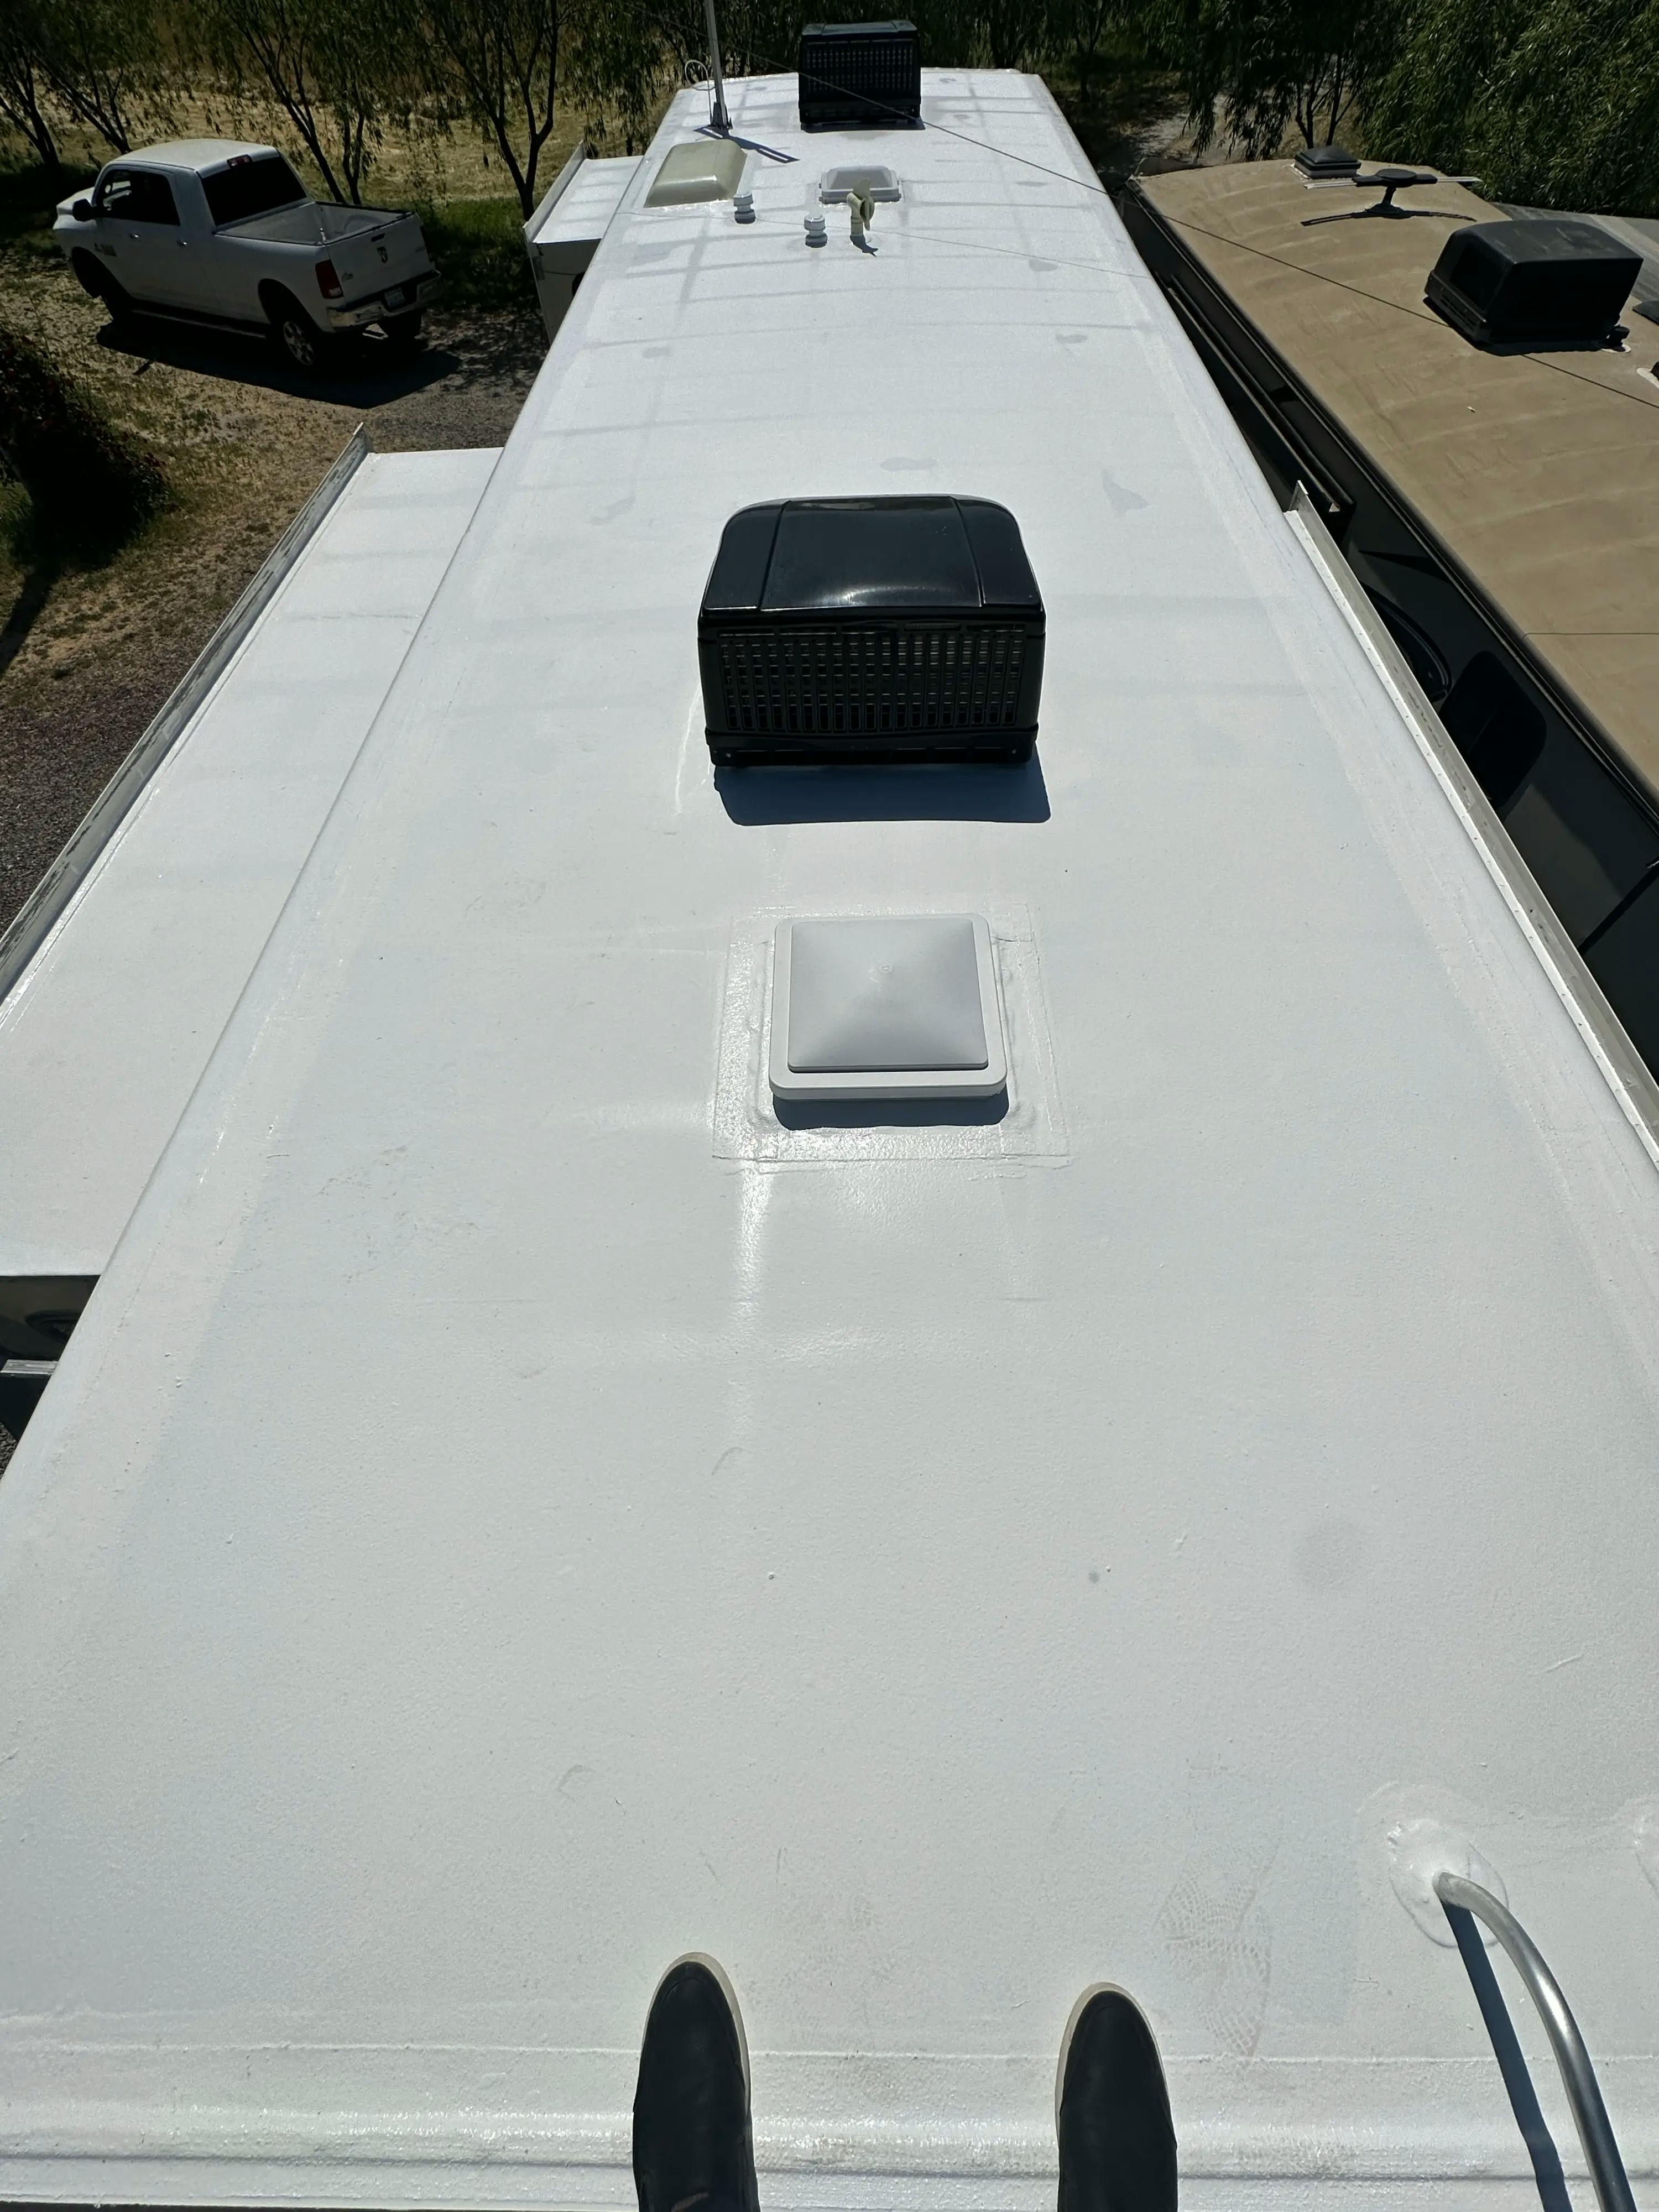 RV Roof Repair and Replacement from 100$/mo